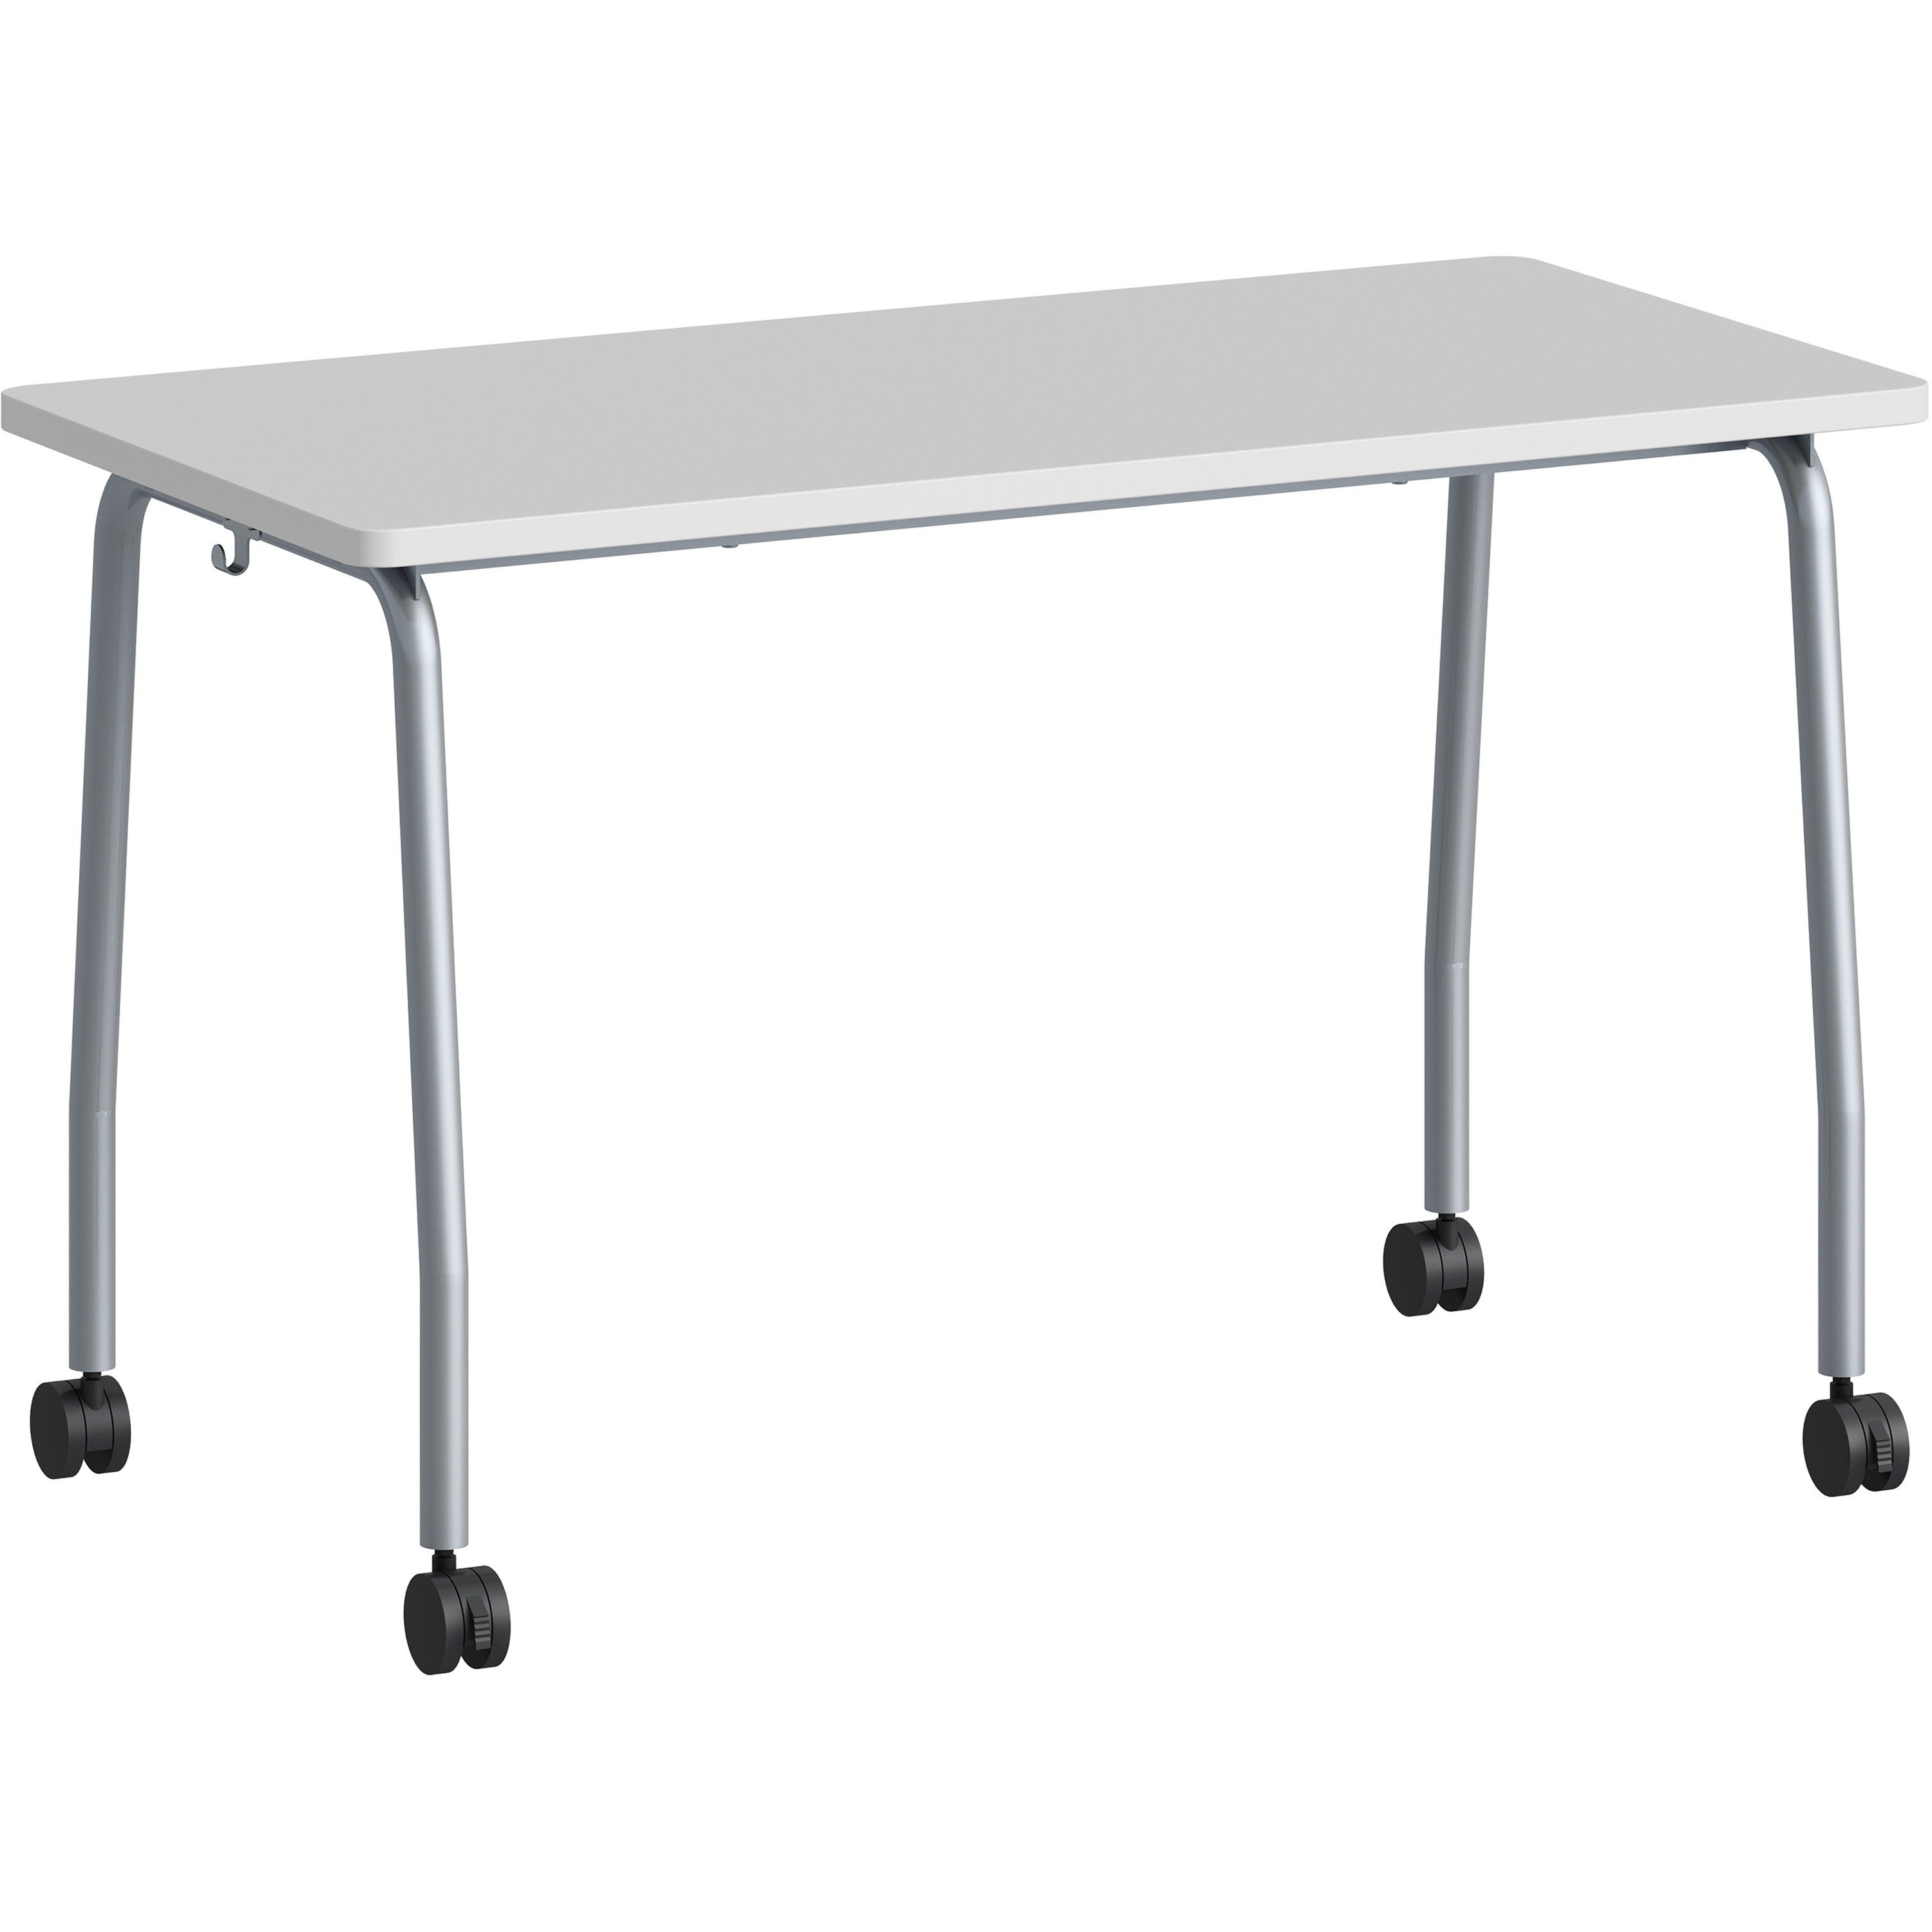 lorell-training-table-for-table-toplaminated-top-300-lb-capacity-2950-table-top-length-x-2363-table-top-width-x-1-table-top-thickness-4725-height-assembly-required-gray-particleboard-top-material-1-each_llr60847 - 1